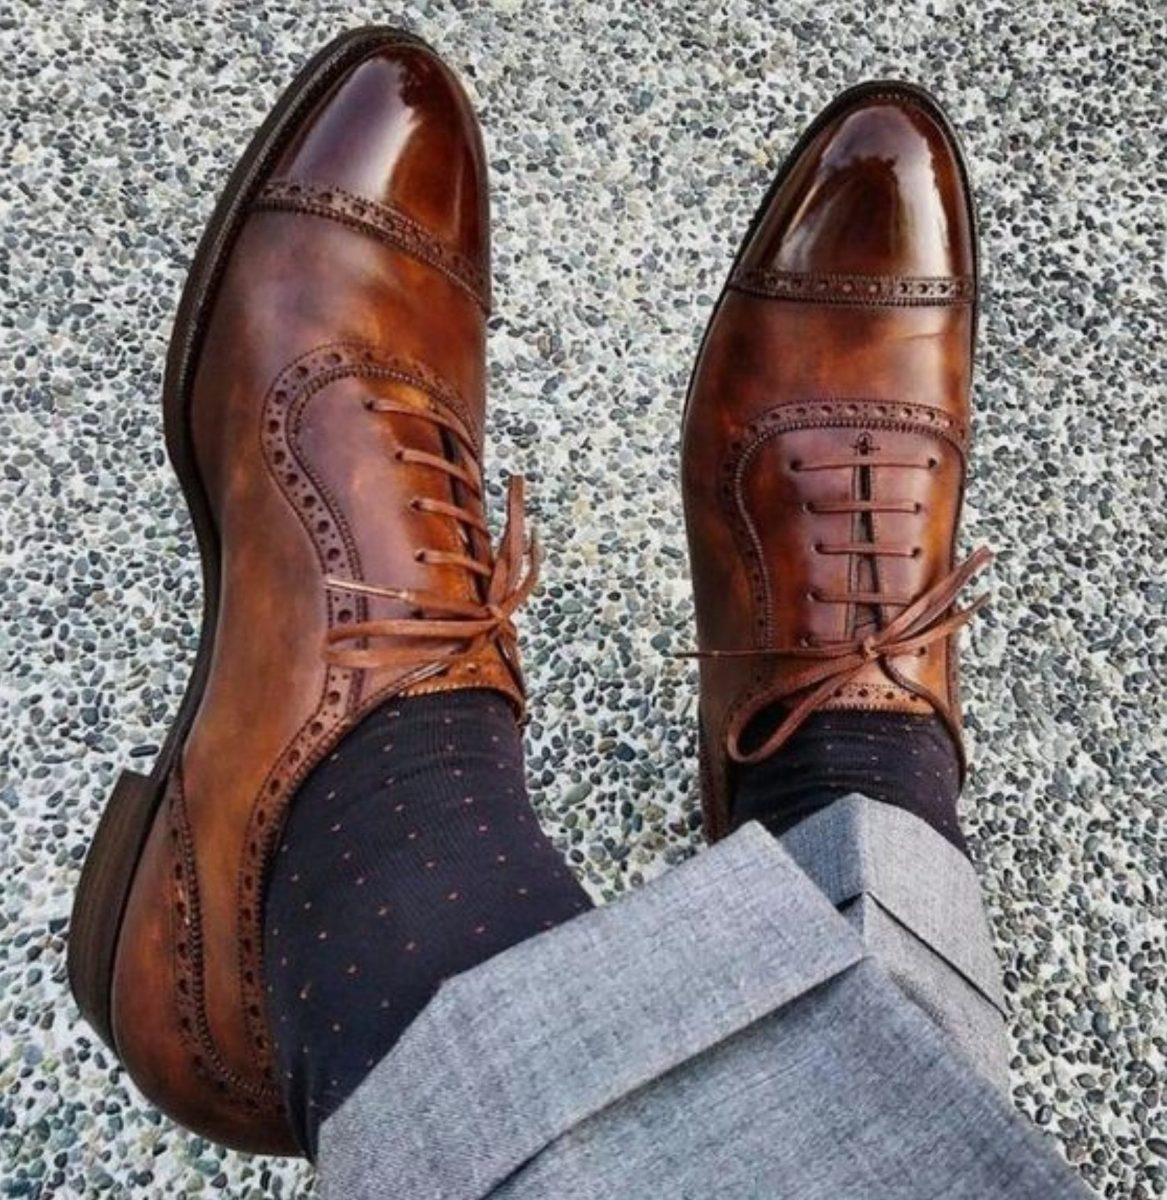 Brown Shoes Tips: What Color Socks To Wear - Hood MWR